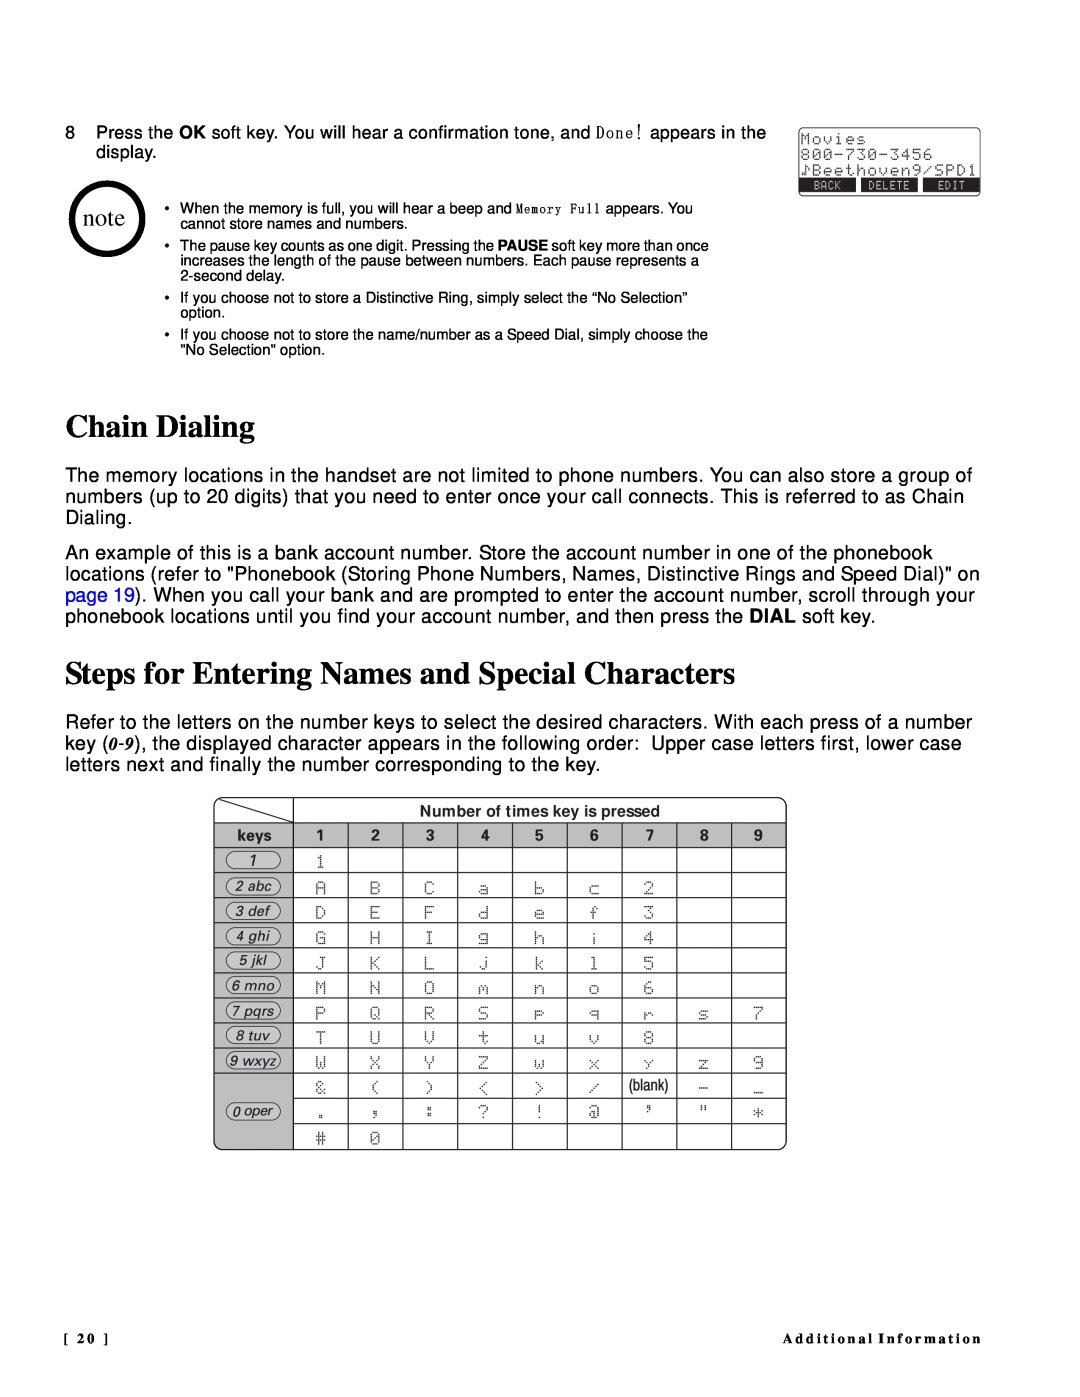 NEC DTR-IR-2 user manual Chain Dialing, Steps for Entering Names and Special Characters, Number of times key is pressed 